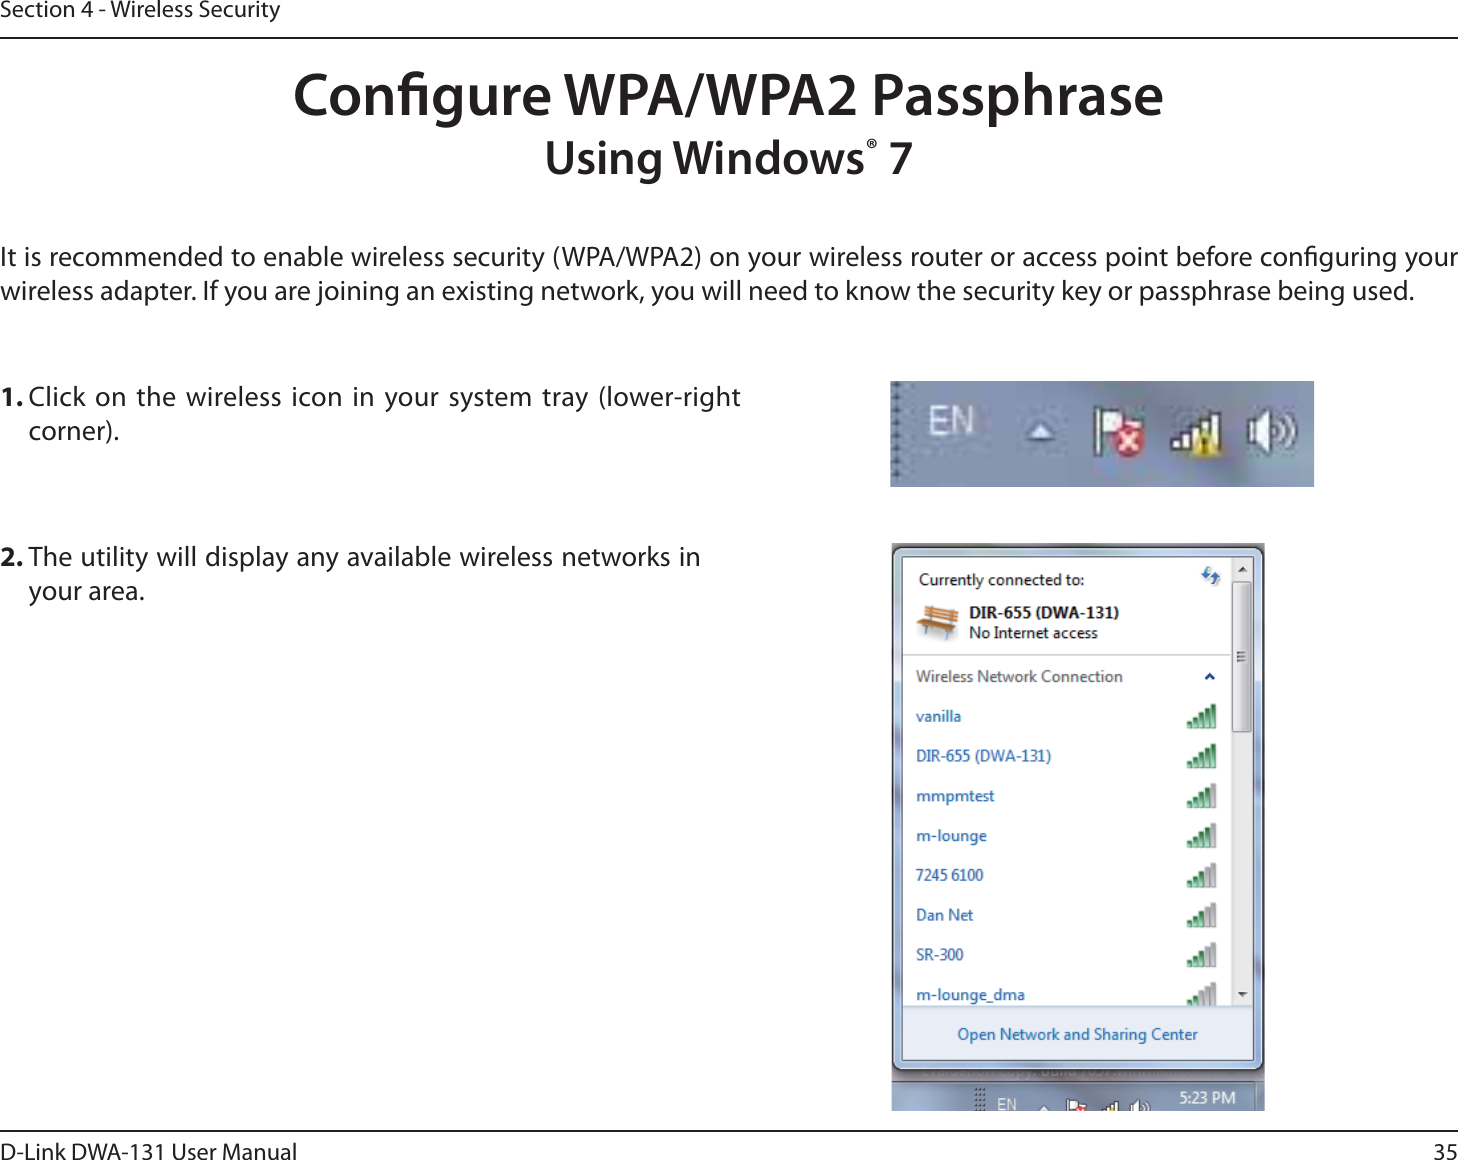 35D-Link DWA-131 User ManualSection 4 - Wireless SecurityCongure WPA/WPA2 PassphraseUsing Windows® 7It is recommended to enable wireless security (WPA/WPA2) on your wireless router or access point before conguring your wireless adapter. If you are joining an existing network, you will need to know the security key or passphrase being used.2. The utility will display any available wireless networks in your area.1. Click on the wireless icon in your system tray (lower-right corner).